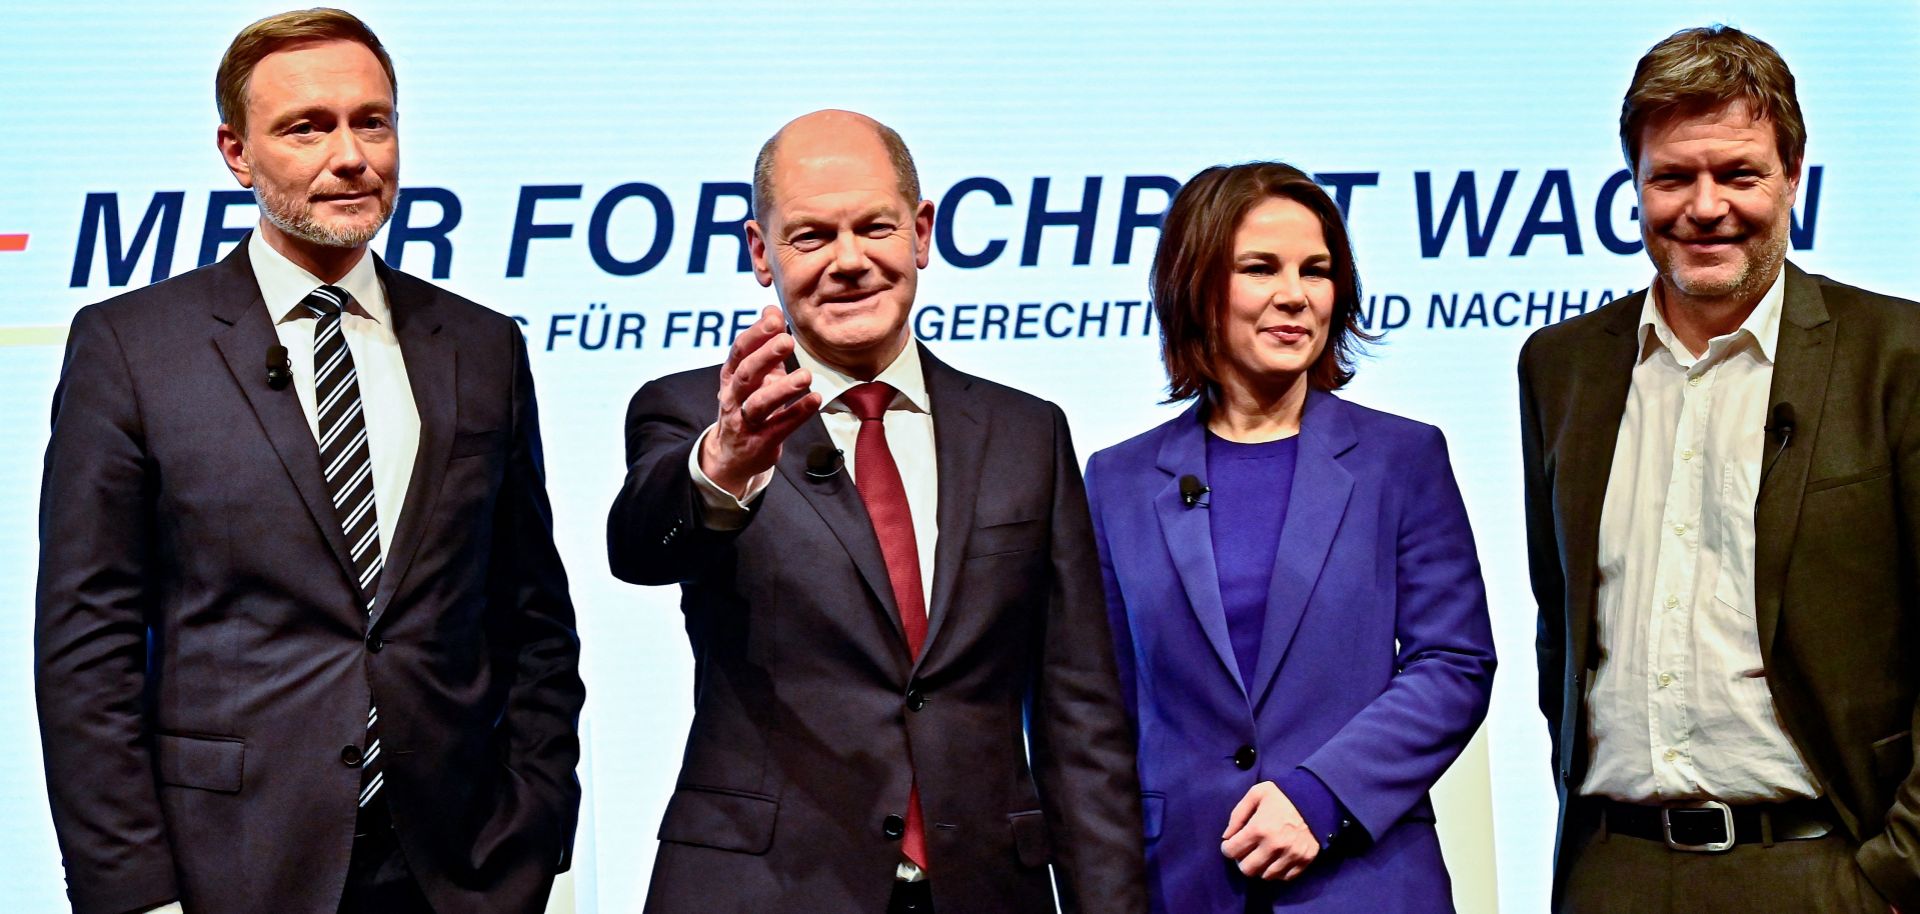 FDP leader Christian Lindner, SPD leader Olaf Scholz and the co-leaders of Germany's Greens party Annalena Baerbock and Robert Habeck (left to right) pose during a press conference in Berlin after presenting their coalition agreement on Nov. 24, 2021. 